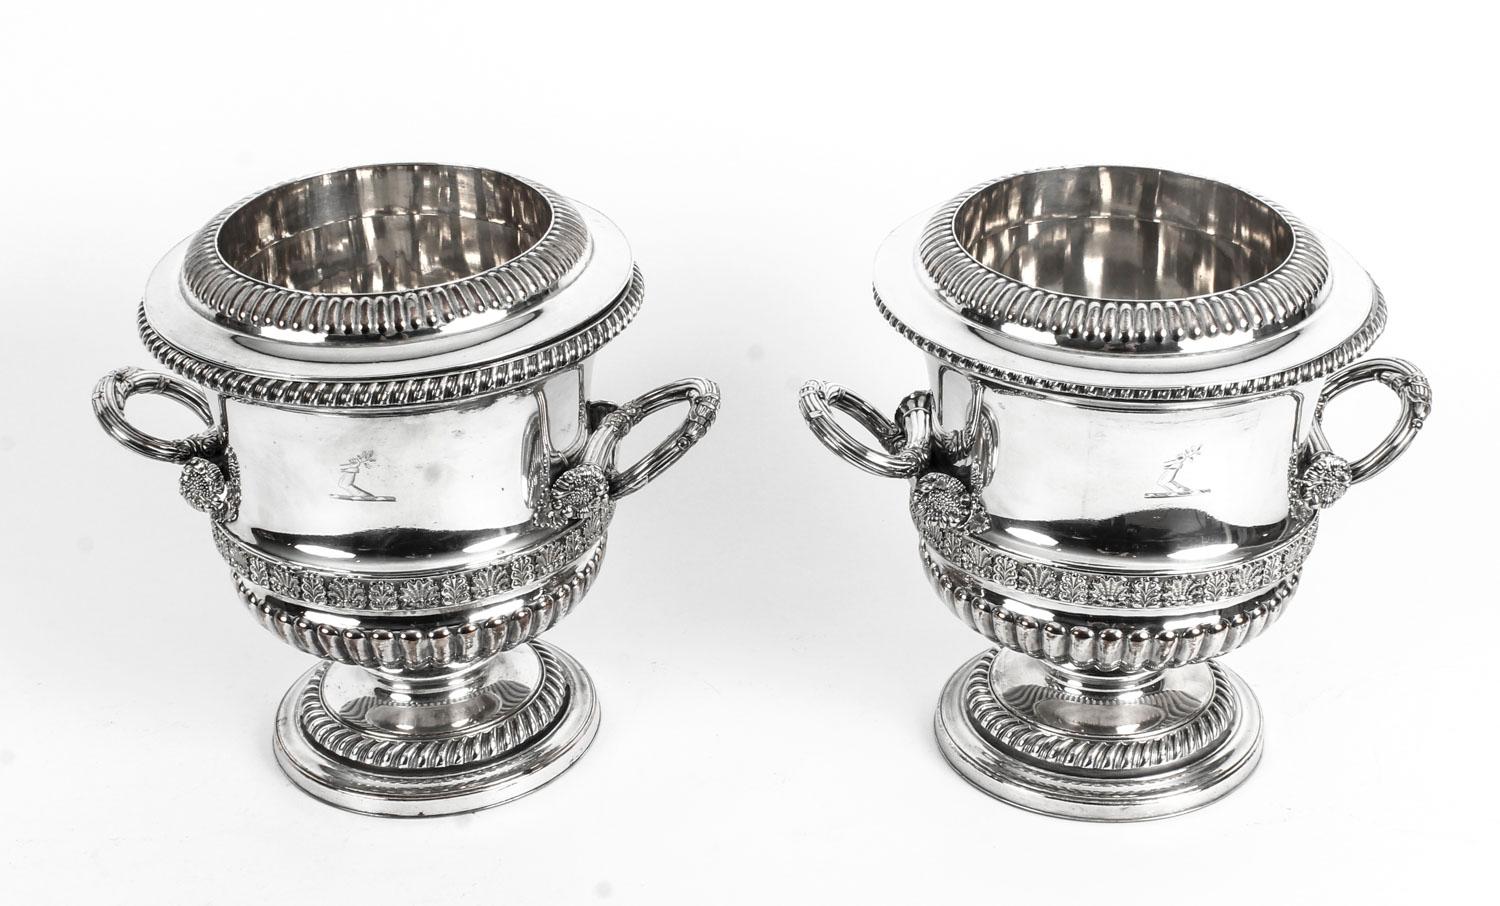 English Antique Pair of Old Sheffield Regency Wine Coolers, 19th Century